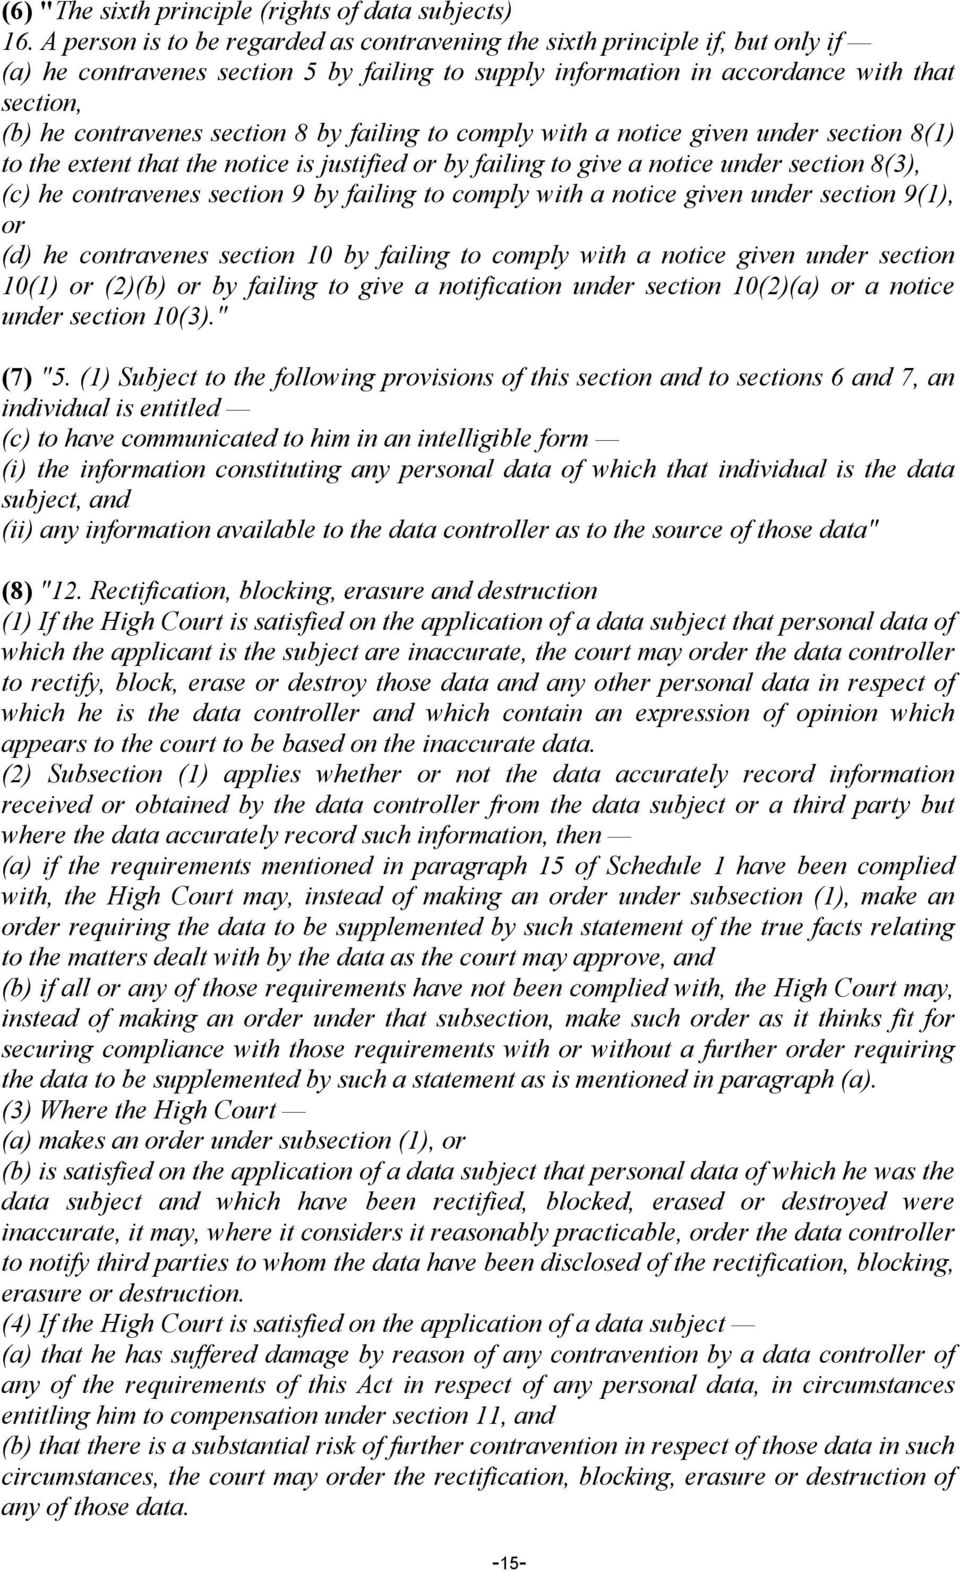 section 8 by failing to comply with a notice given under section 8(1) to the extent that the notice is justified or by failing to give a notice under section 8(3), (c) he contravenes section 9 by